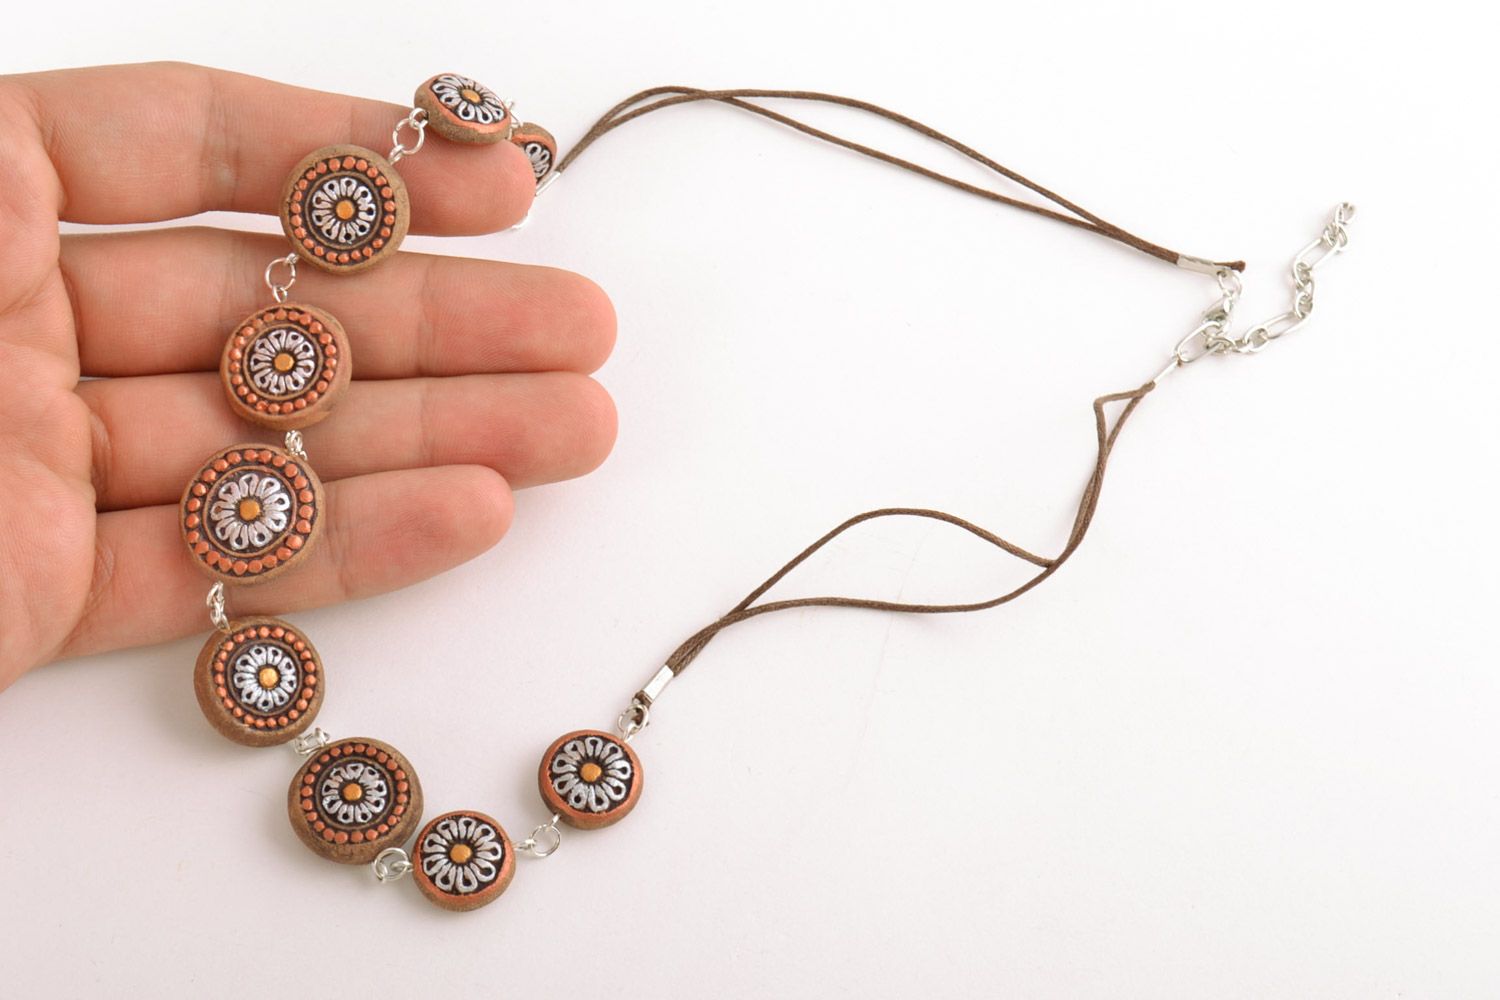 Handmade ceramic bead necklace painted with ornaments in ethnic style for women photo 2